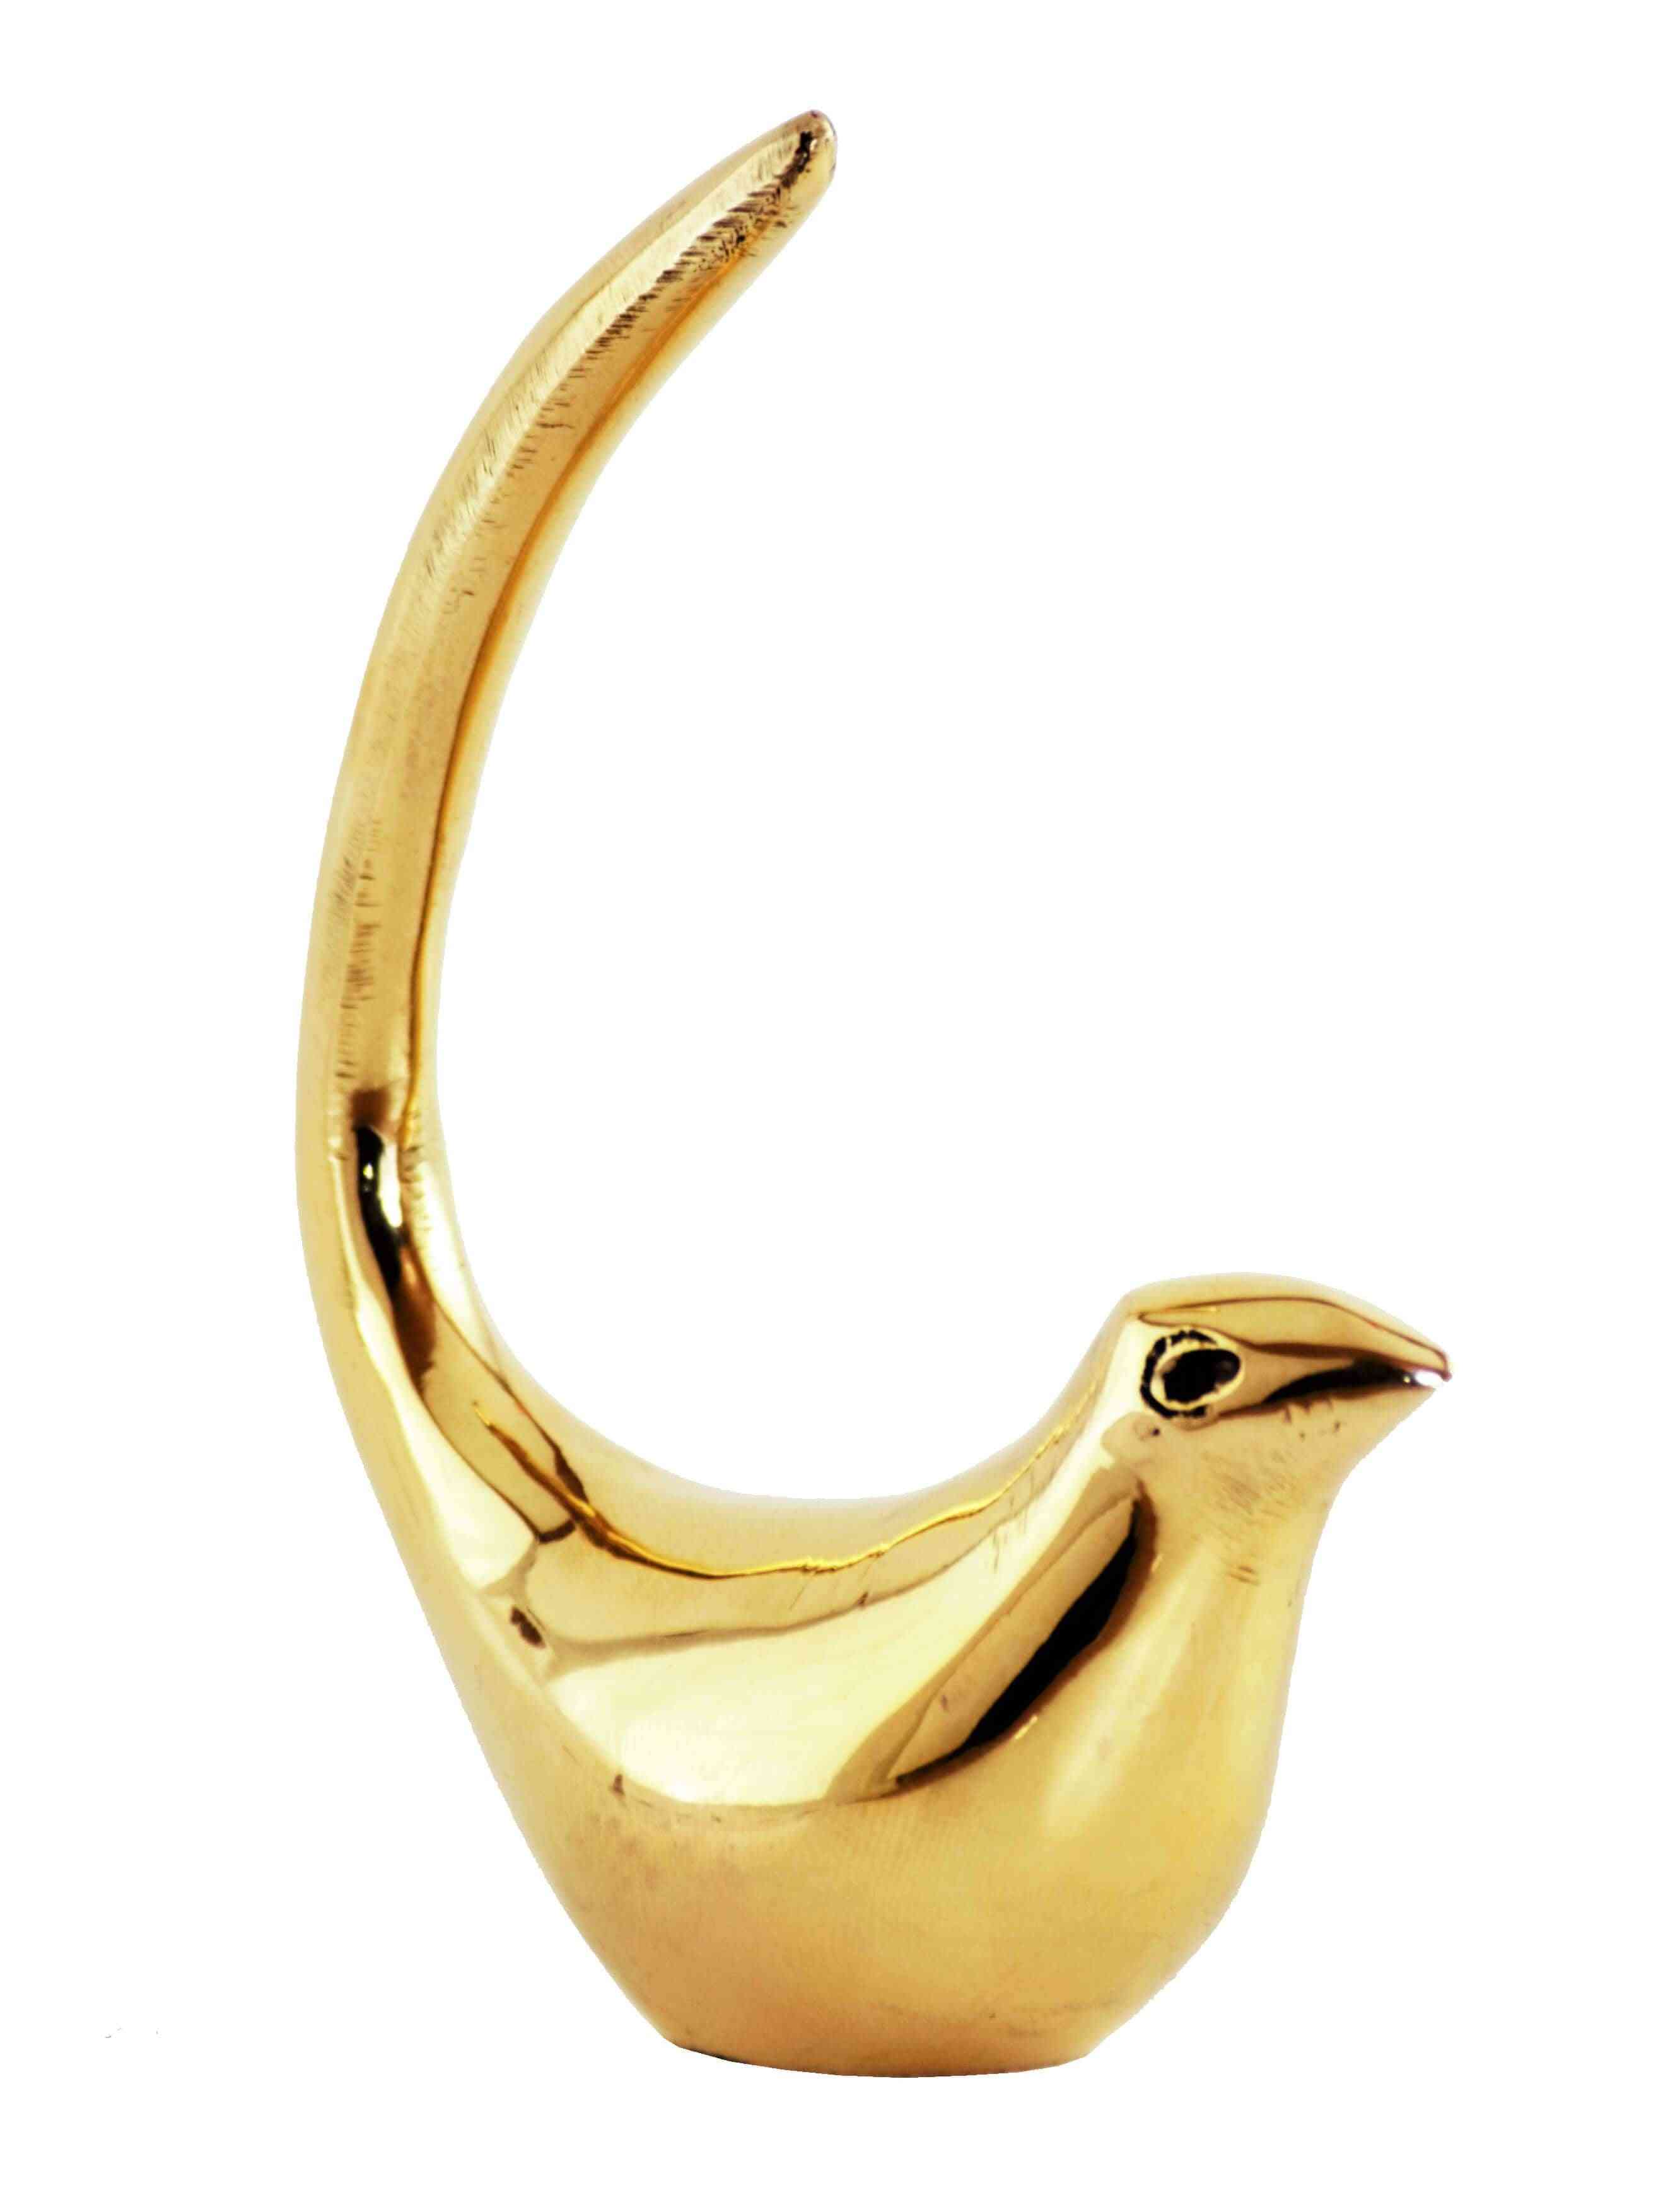 Handcrafted Table Top Bird Figurines - Jewelry Ring Stand